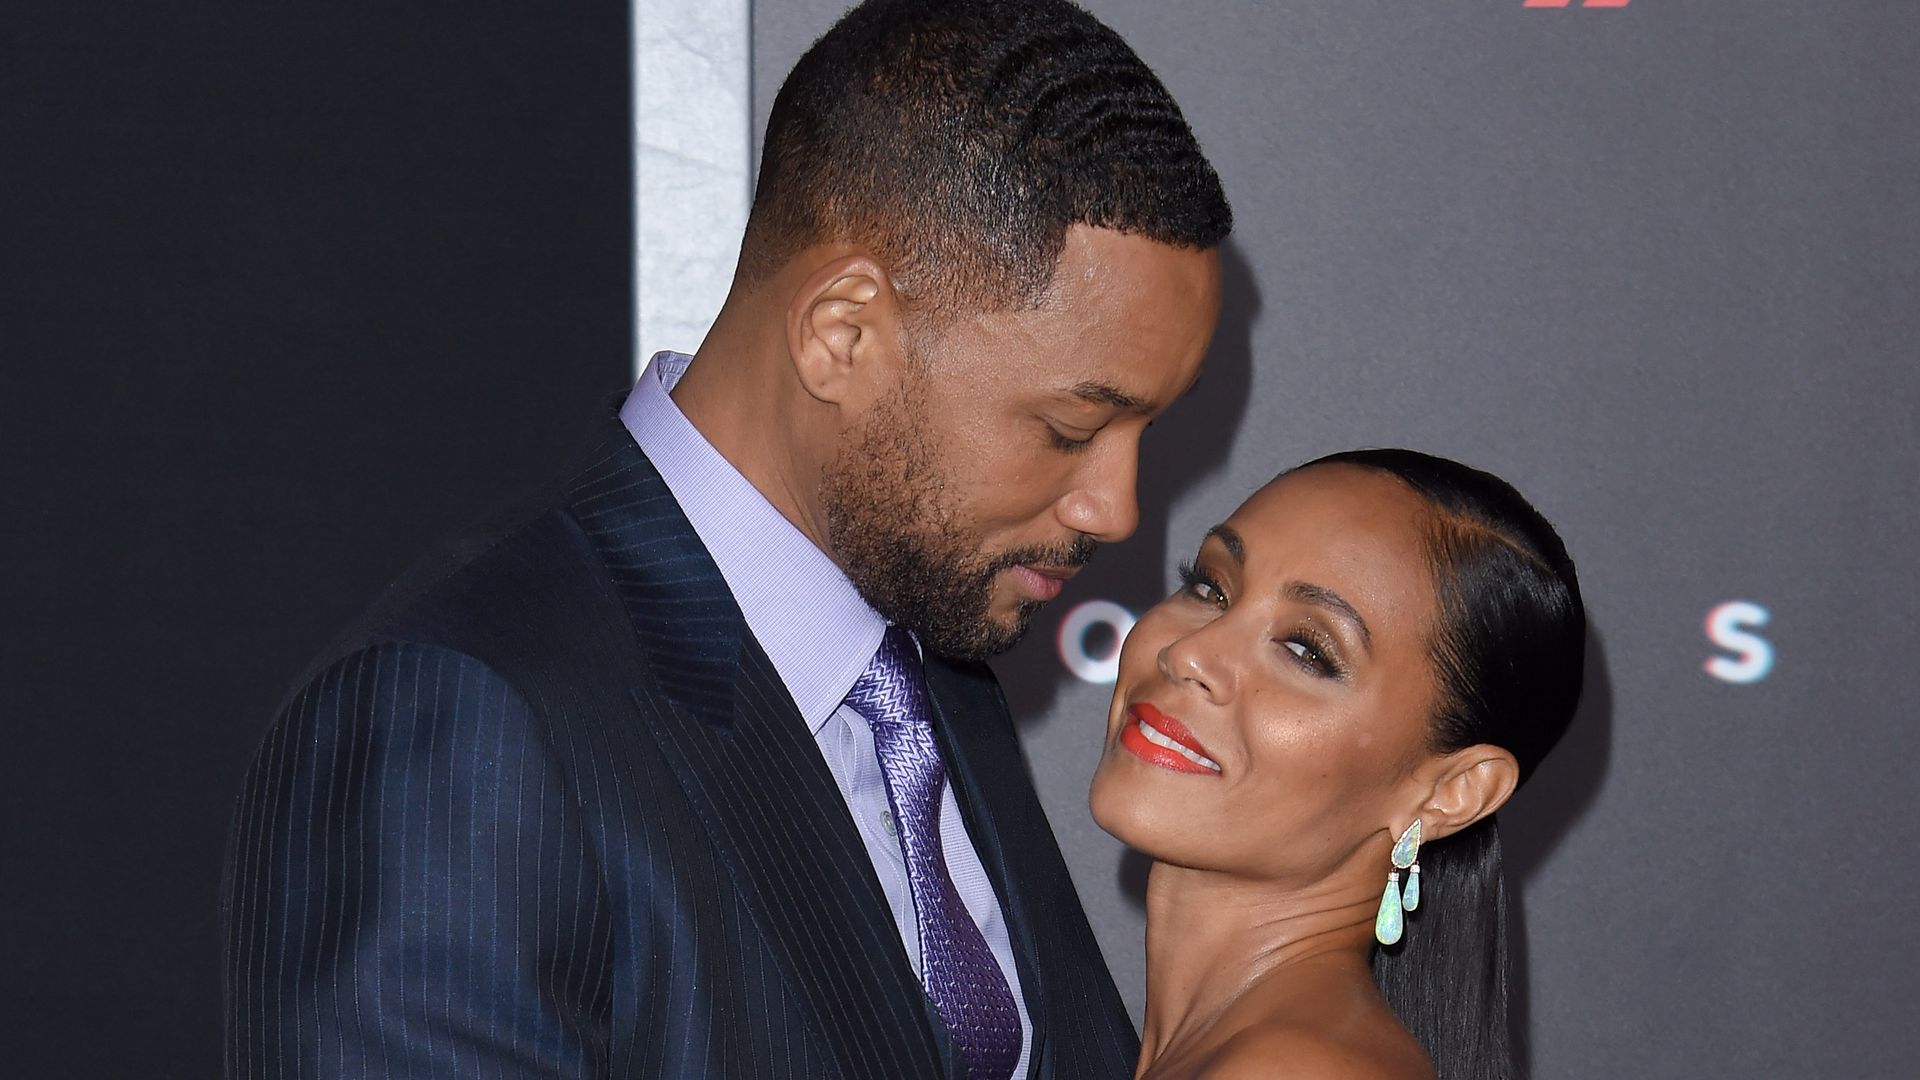 Inside Will Smiths 25-year+ marriage Jada Pinkett Smith never wanted HELLO!